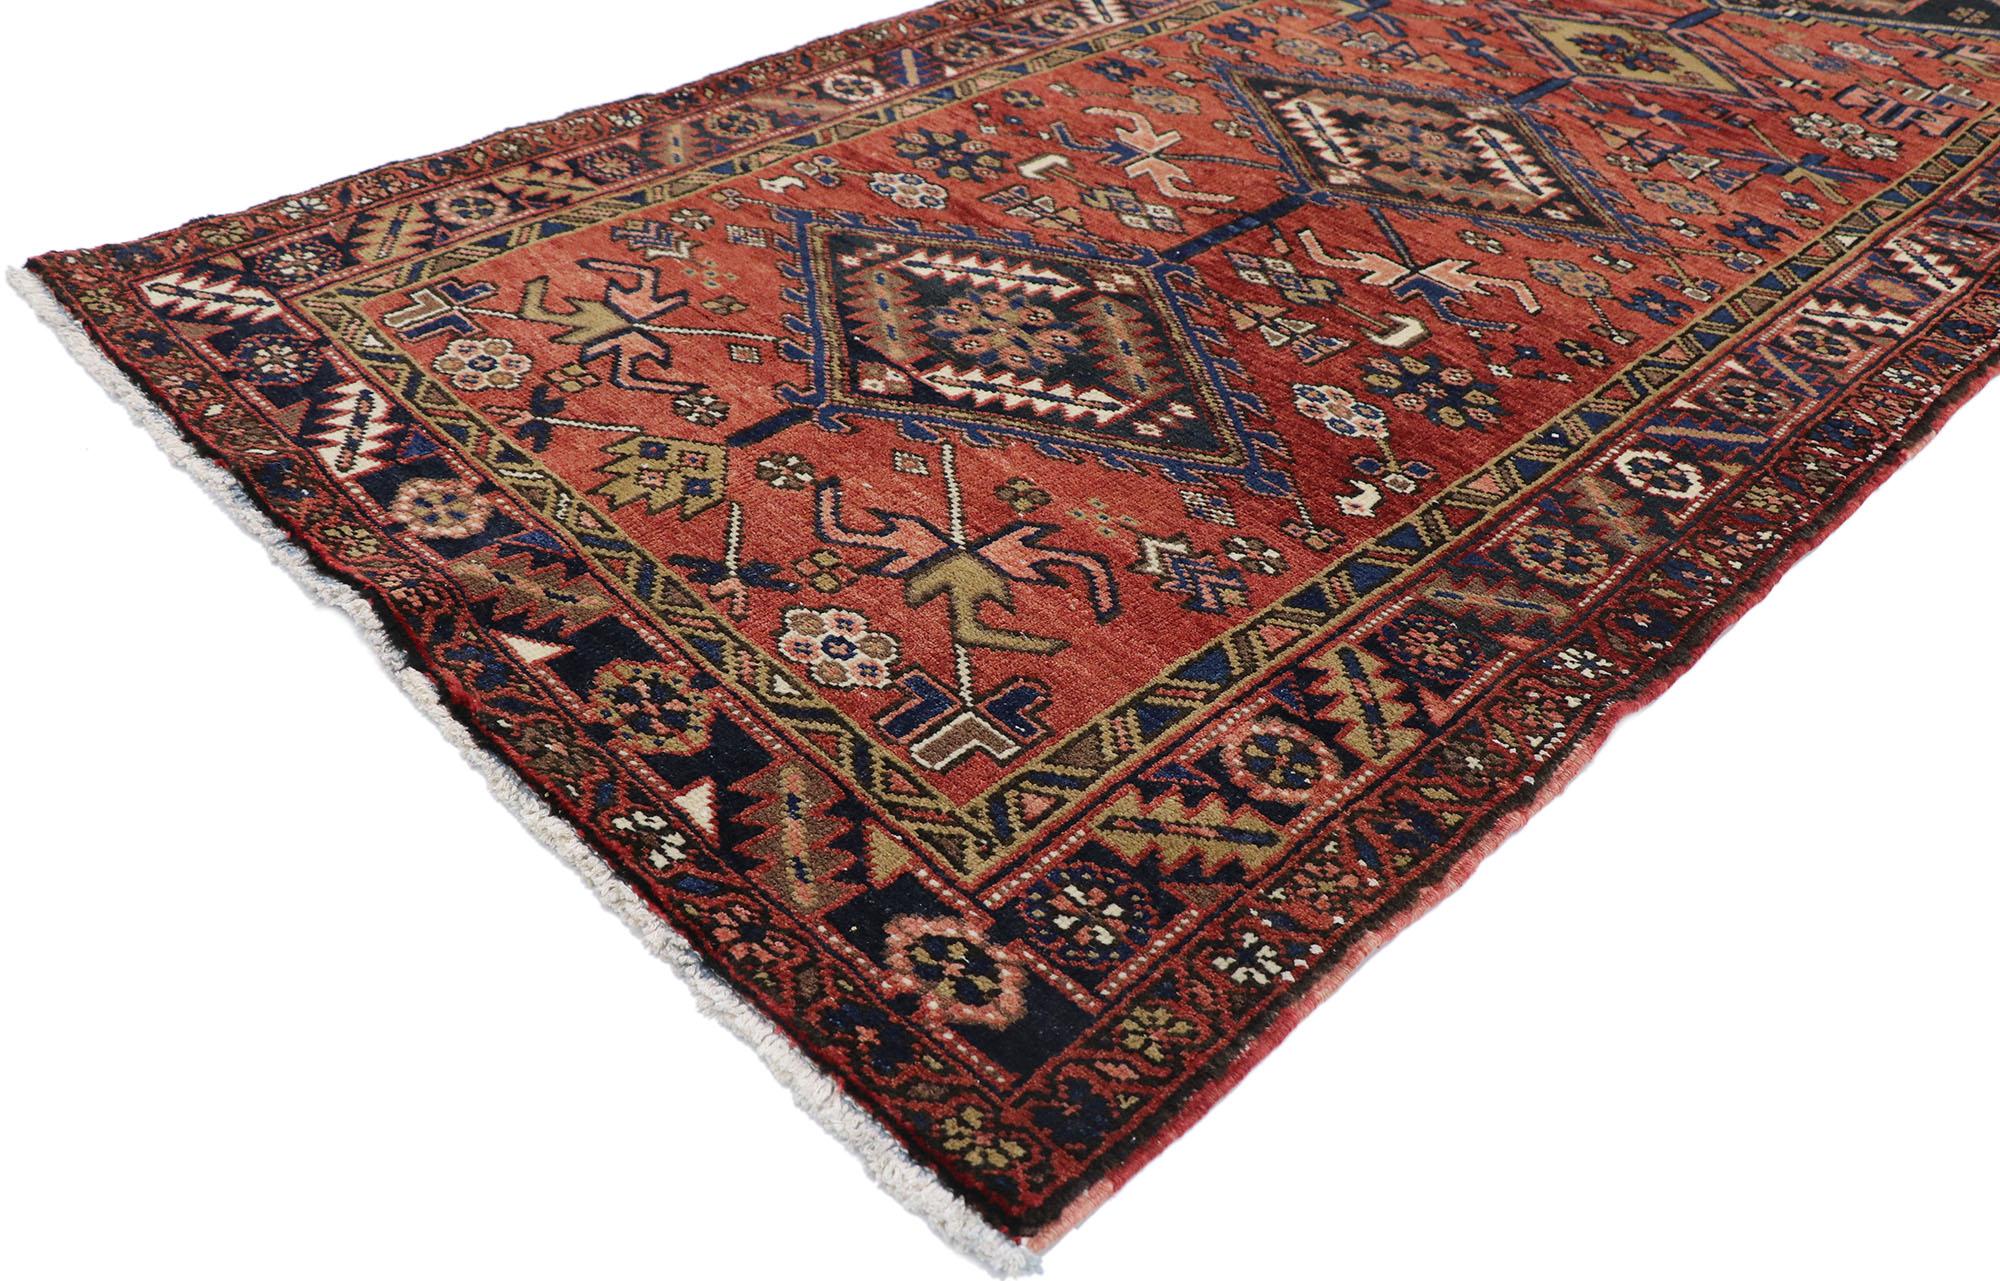 60883-60887 pair of matching vintage Persian Heriz Runners with Mid-Century Modern style. With a timeless design and Mid-Century Modern style, this matching pair of hand knotted wool vintage Persian Heriz runners are a captivating vision of woven